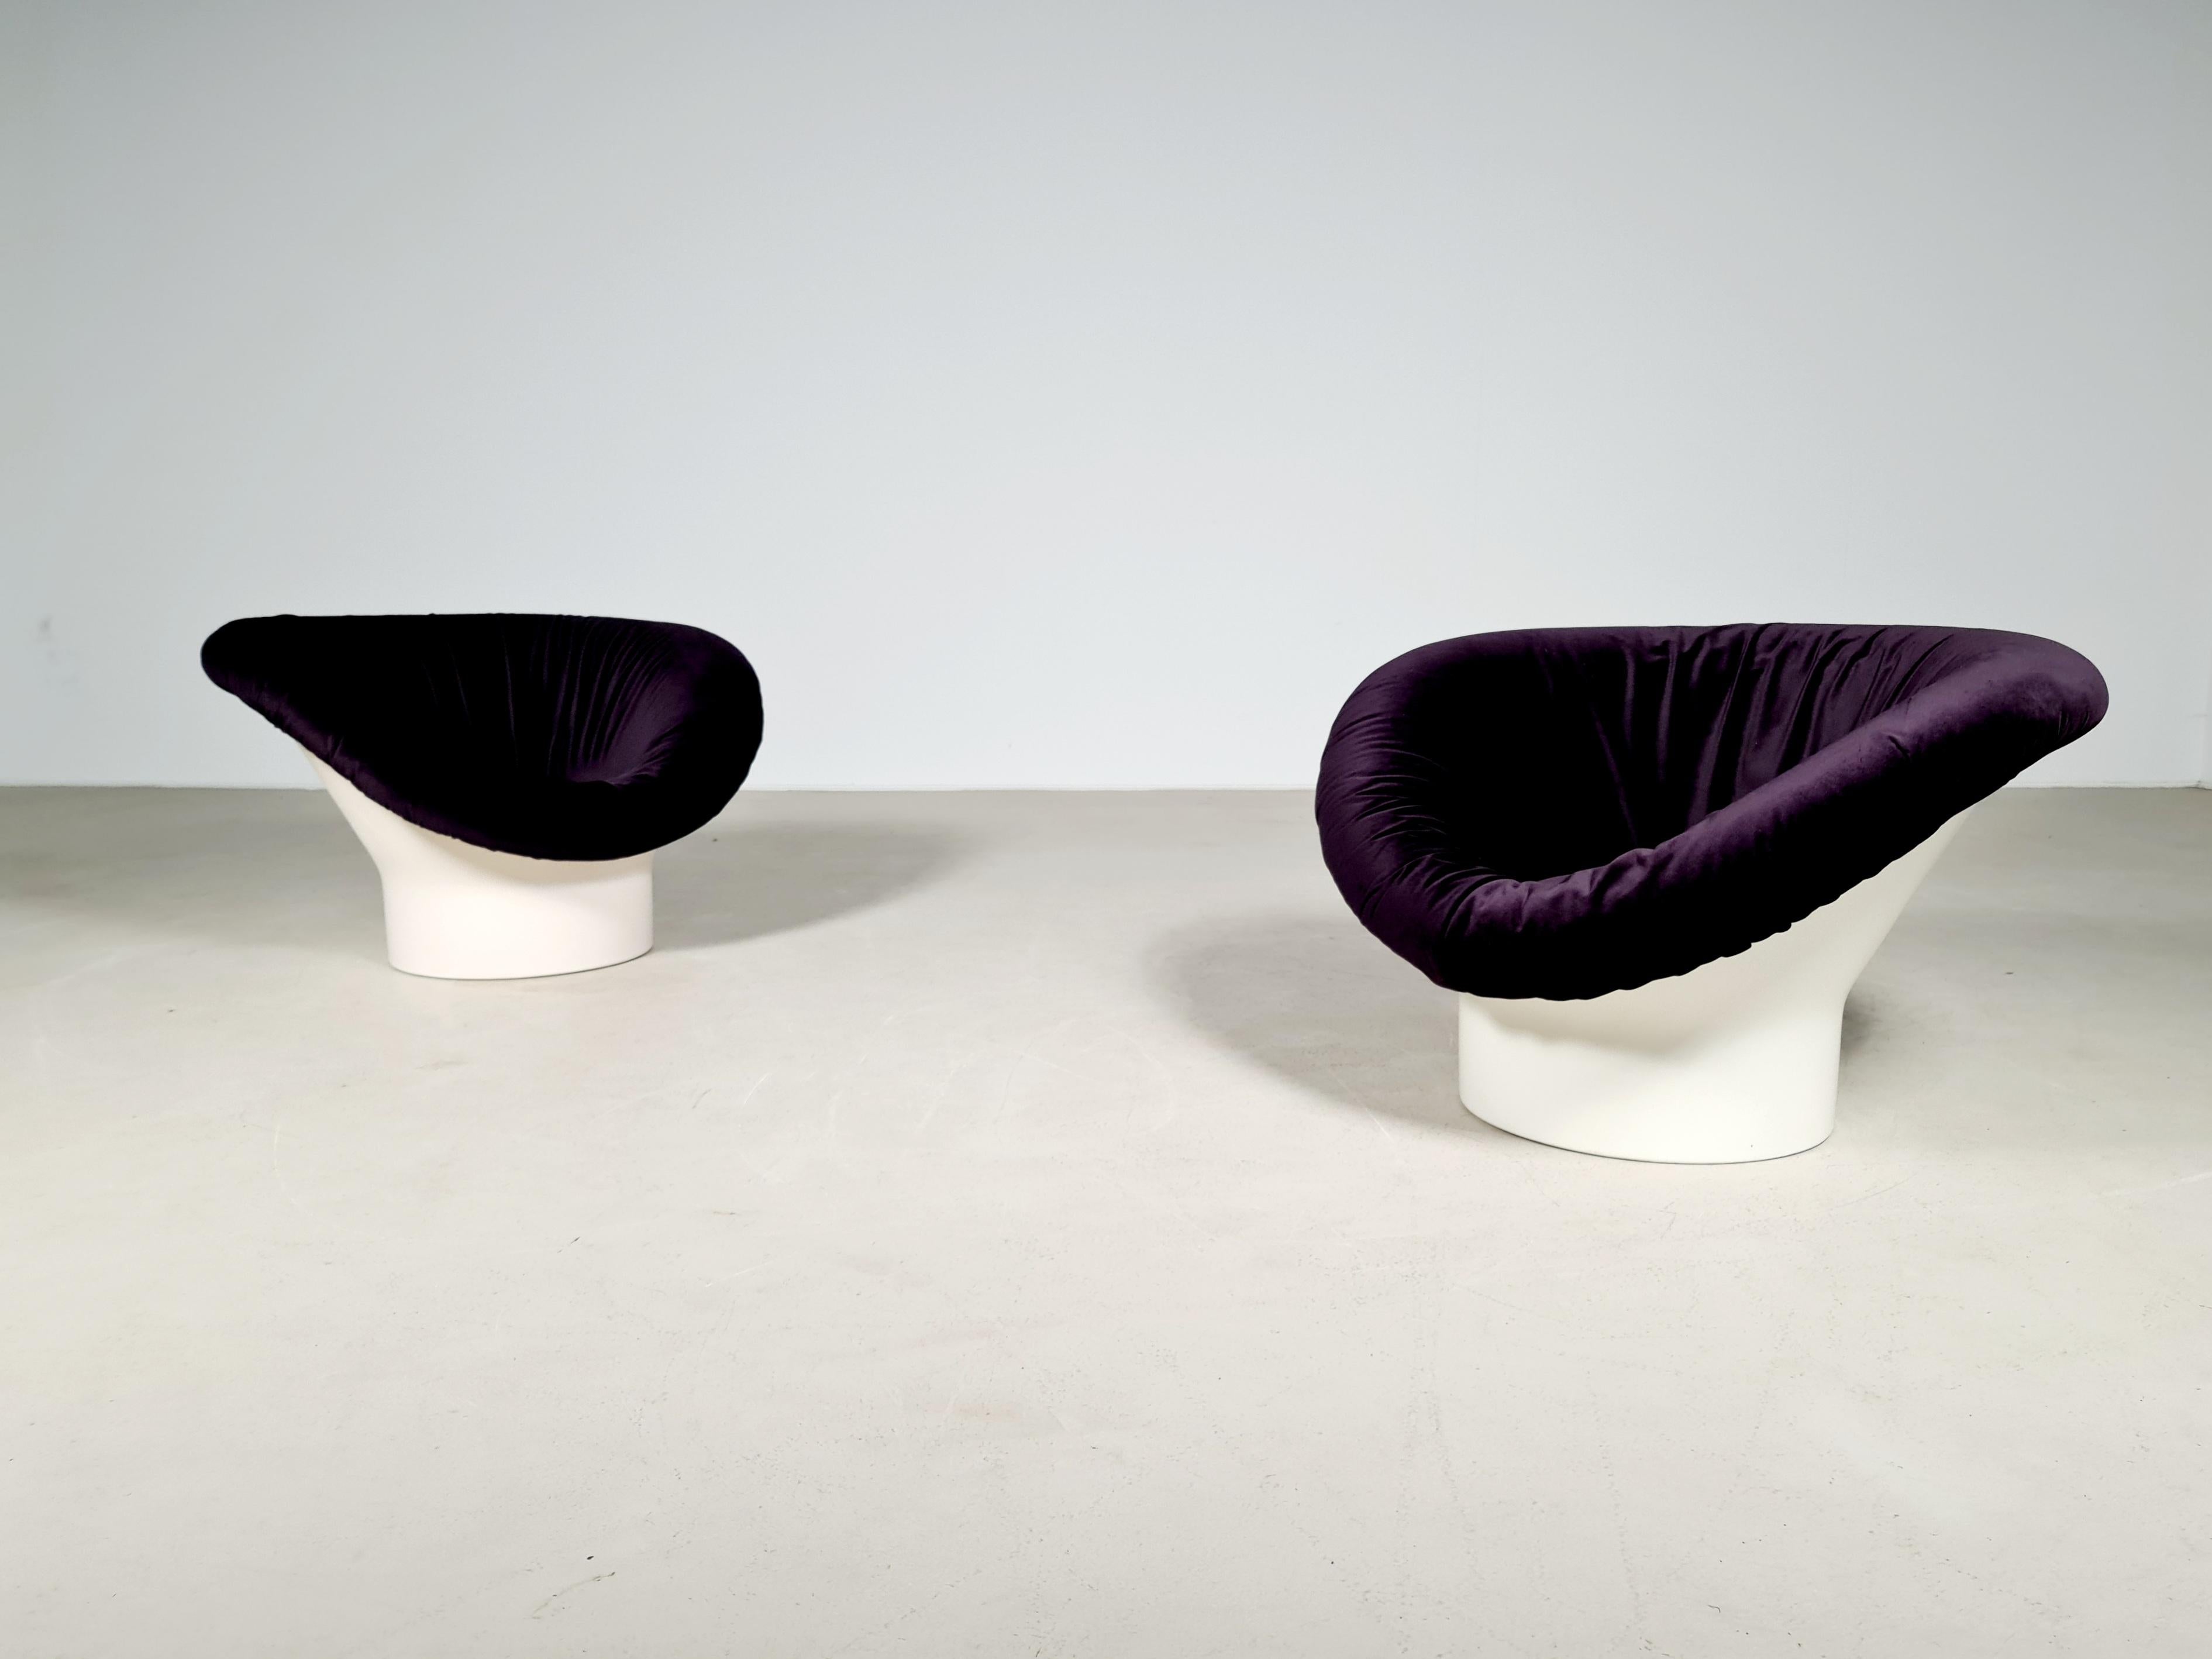 Pop Art 'Krokus' lounge chair by Swedish designer Lennart Bender. Made by Ulferts AB. Molded white fiberglass base with an over sized cushion on top. Reupolstered in a dark purple velvet.